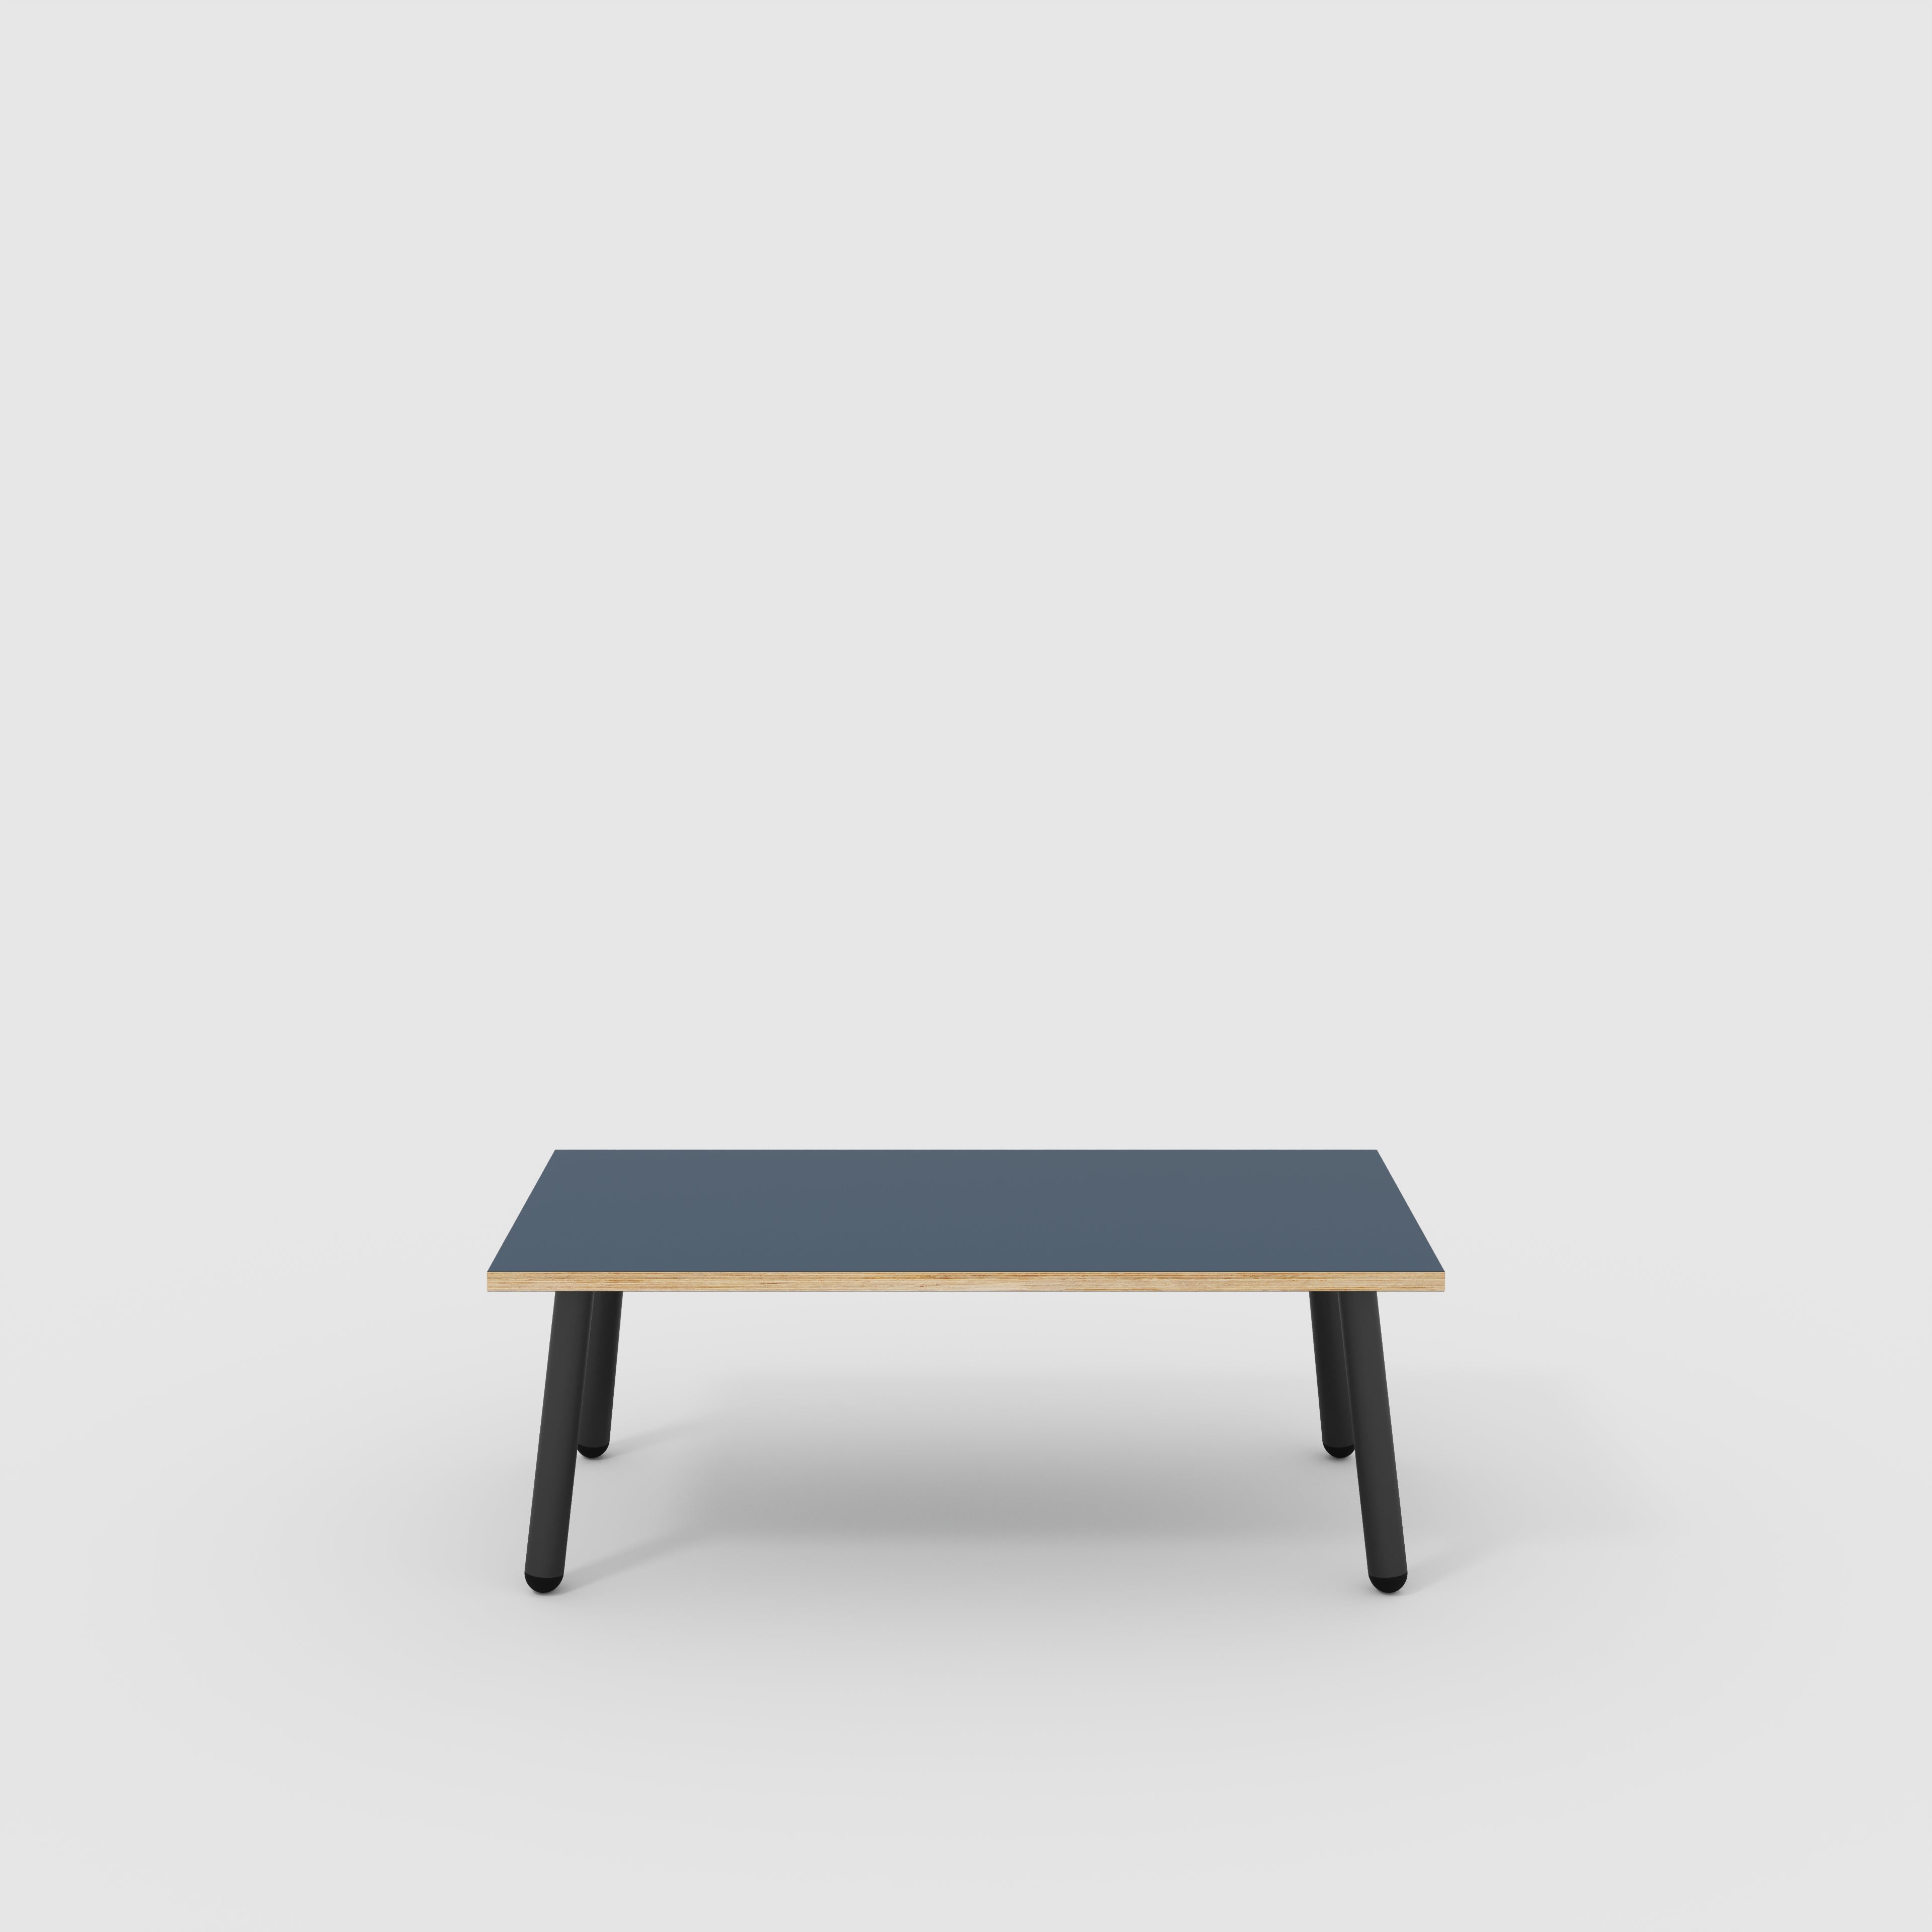 Coffee Table with Black Round Single Pin Legs - Formica Night Sea Blue - 1200(w) x 600(d) x 425(h)